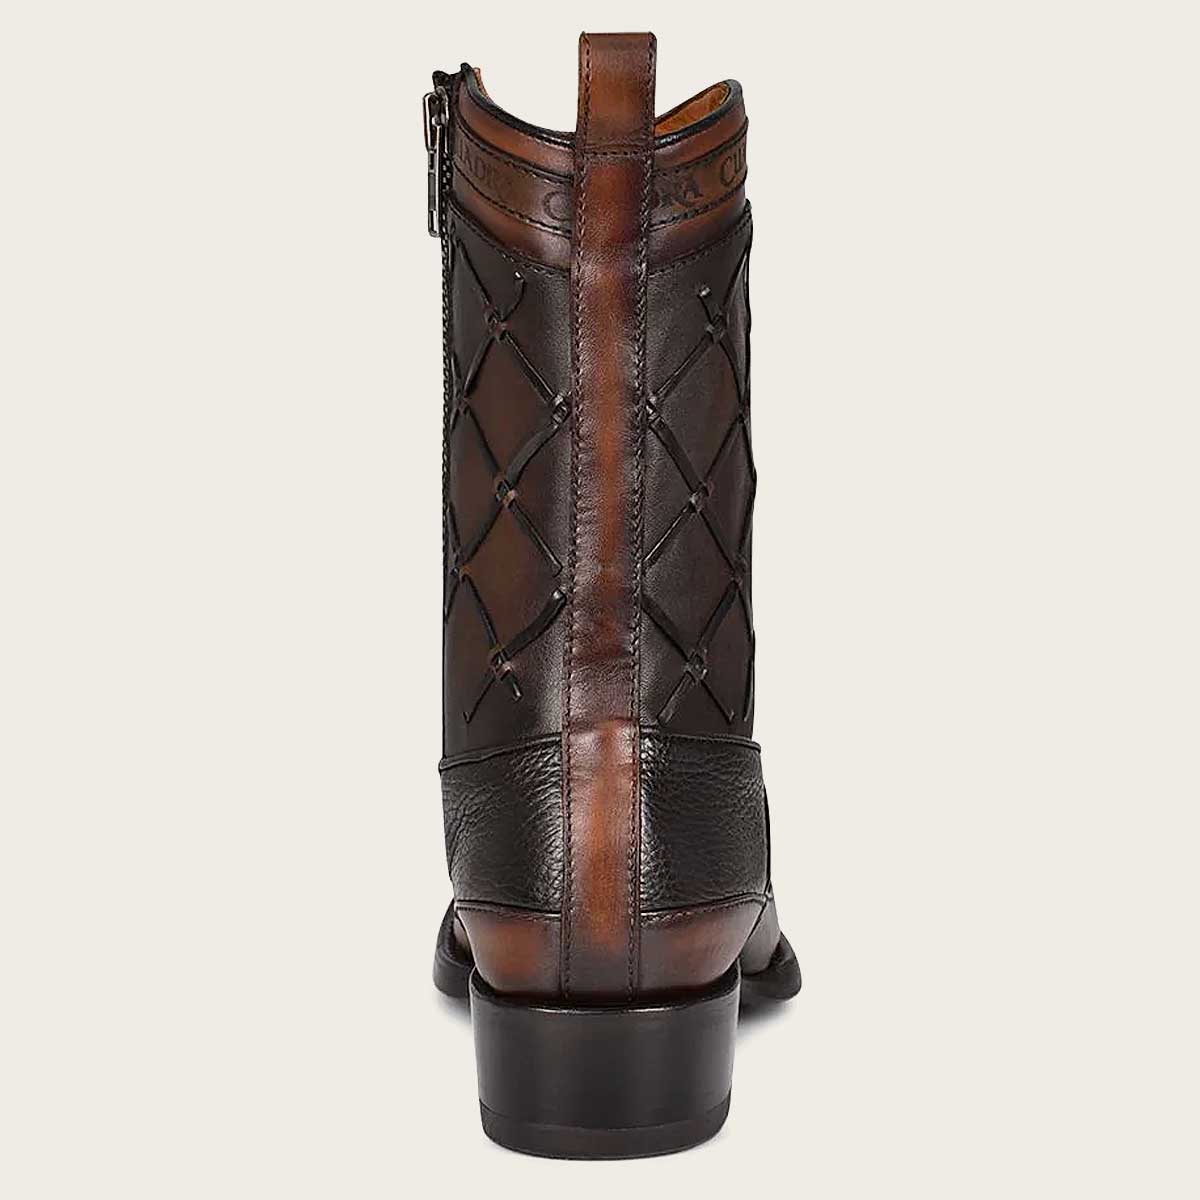 Engraved Cowboy black leather boots with monogram - Cuadra Shop